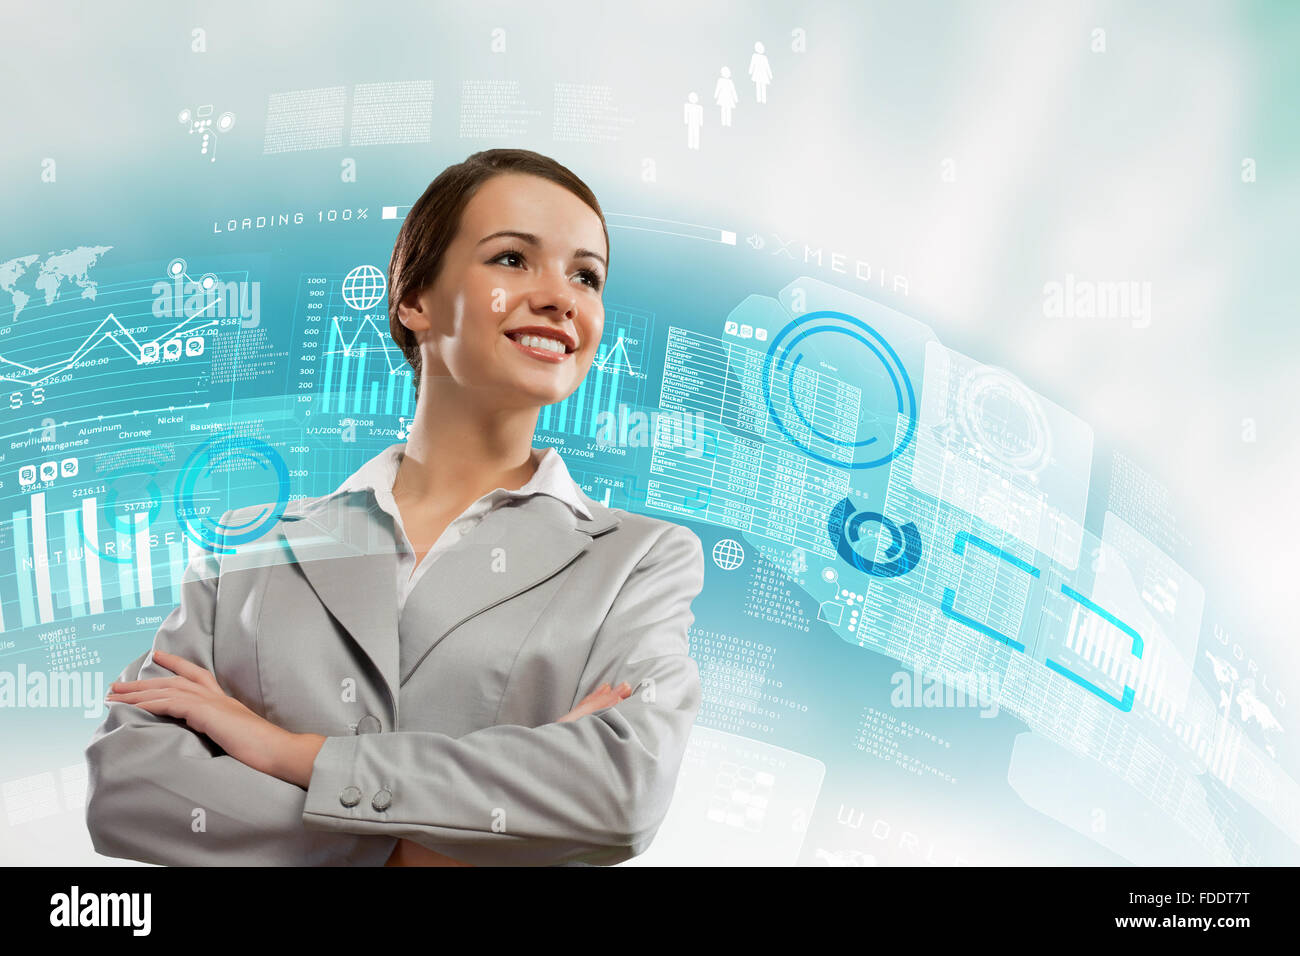 Image of attractive businesswoman against hightech background Stock Photo